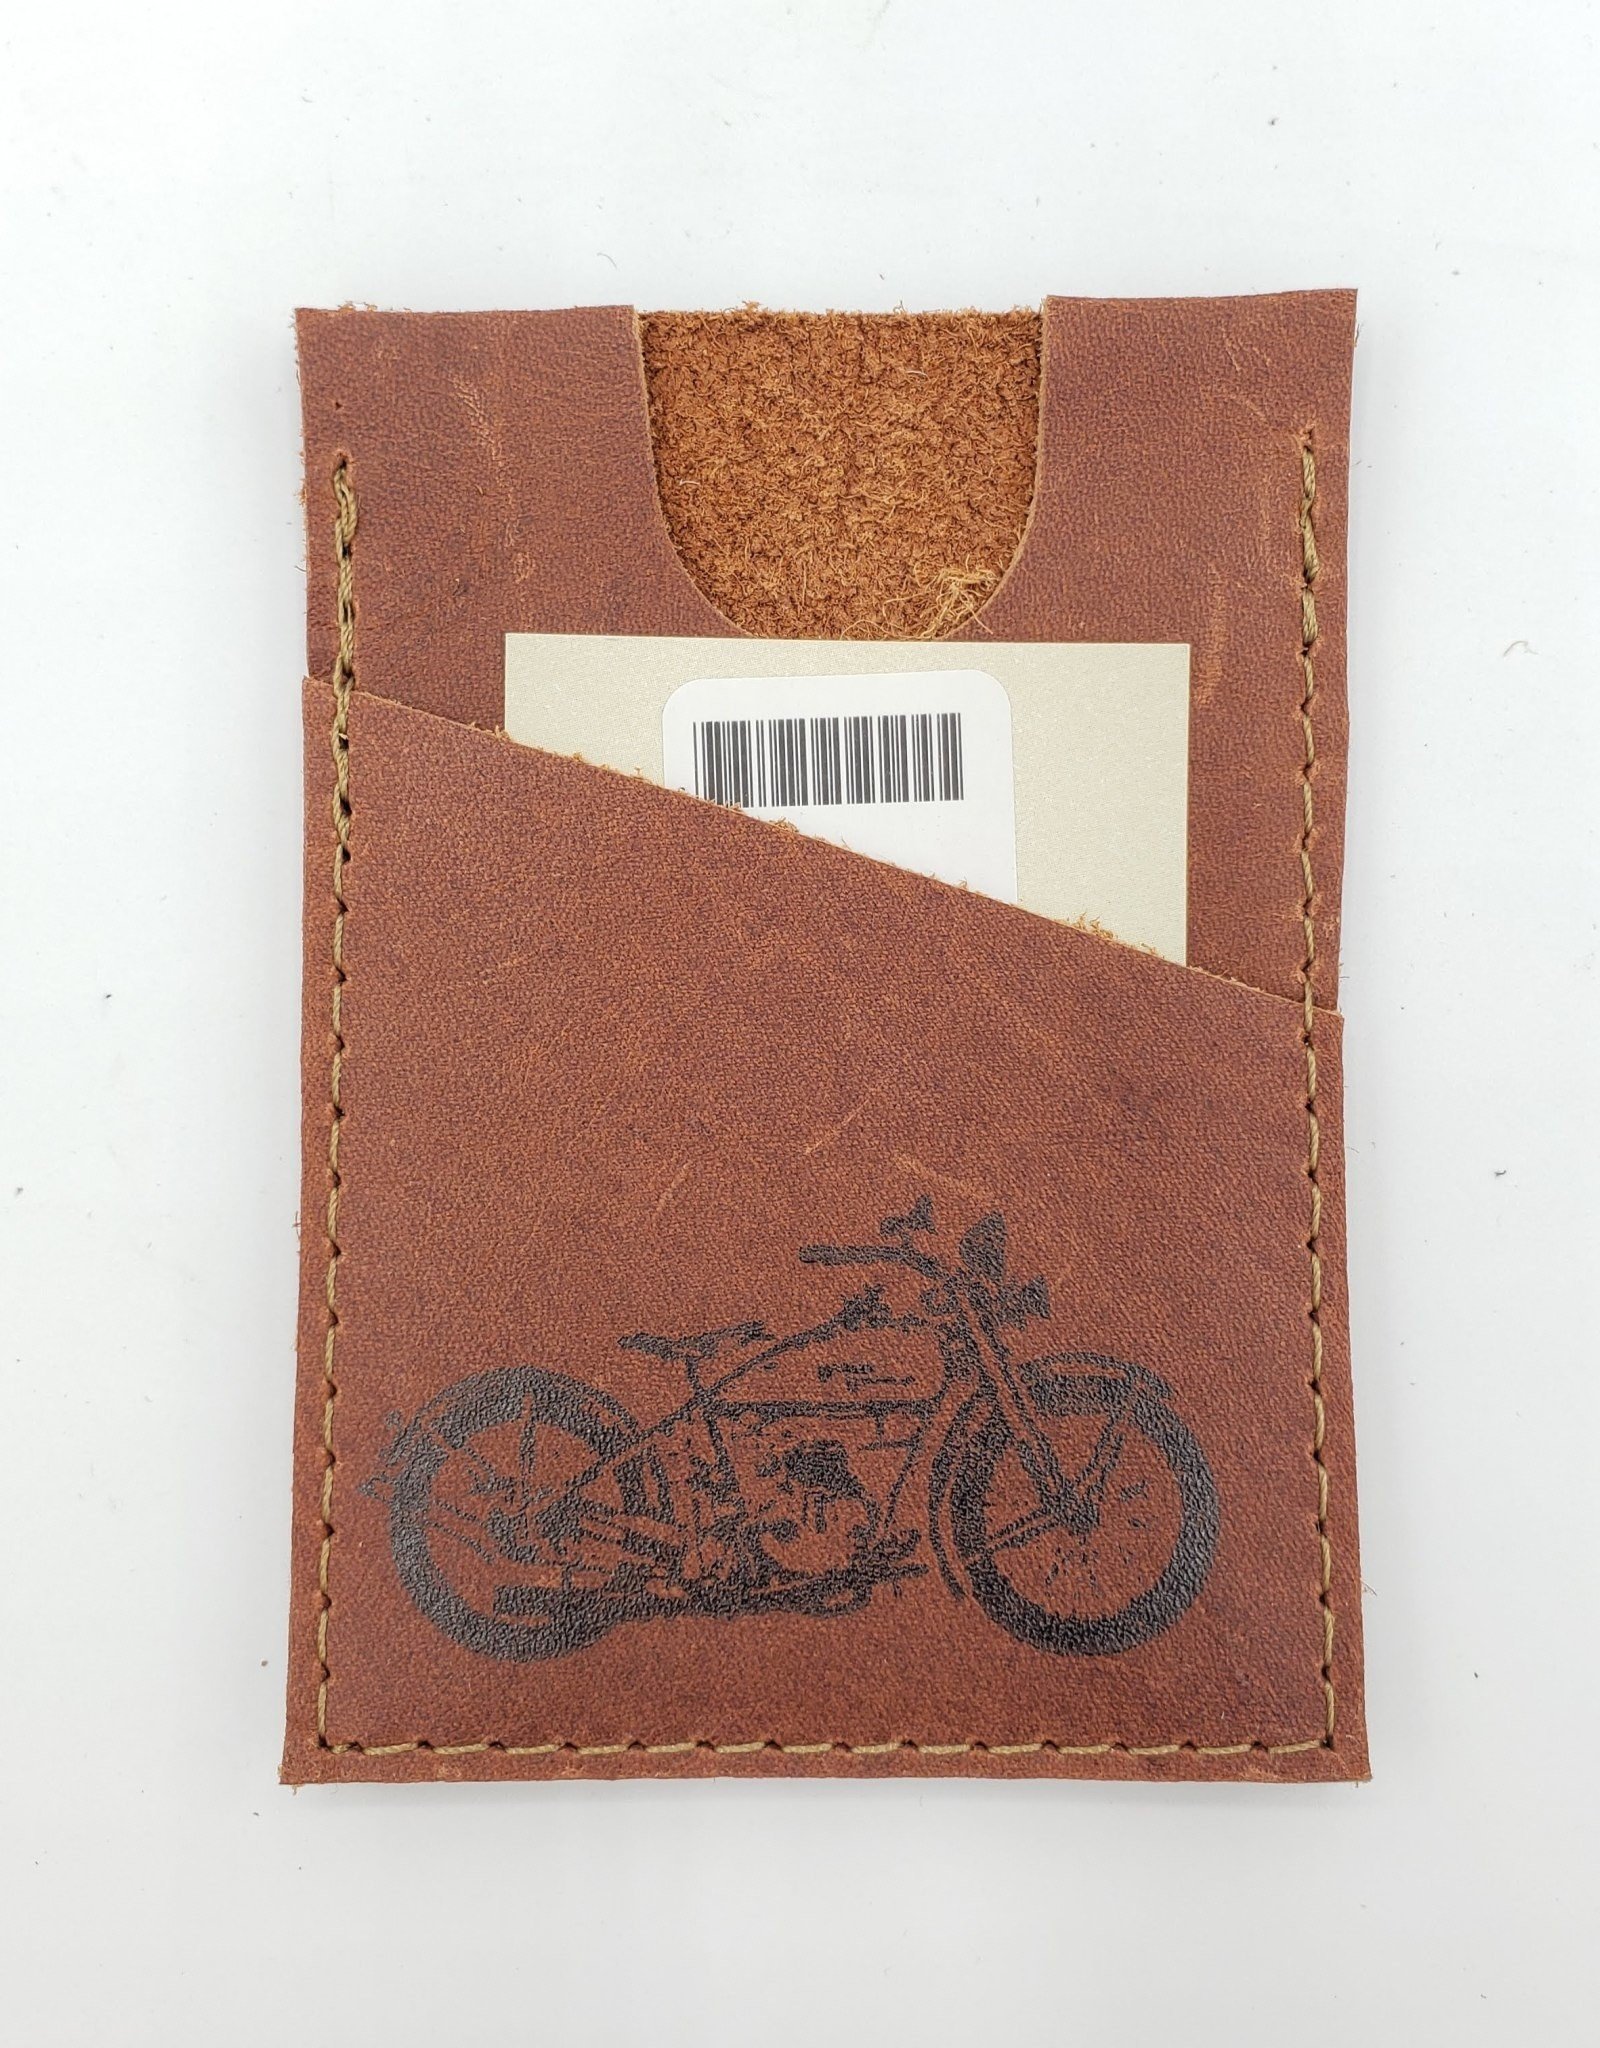 In Blue Handmade Motorcycle - Train Ticket & Card Leather Wallet